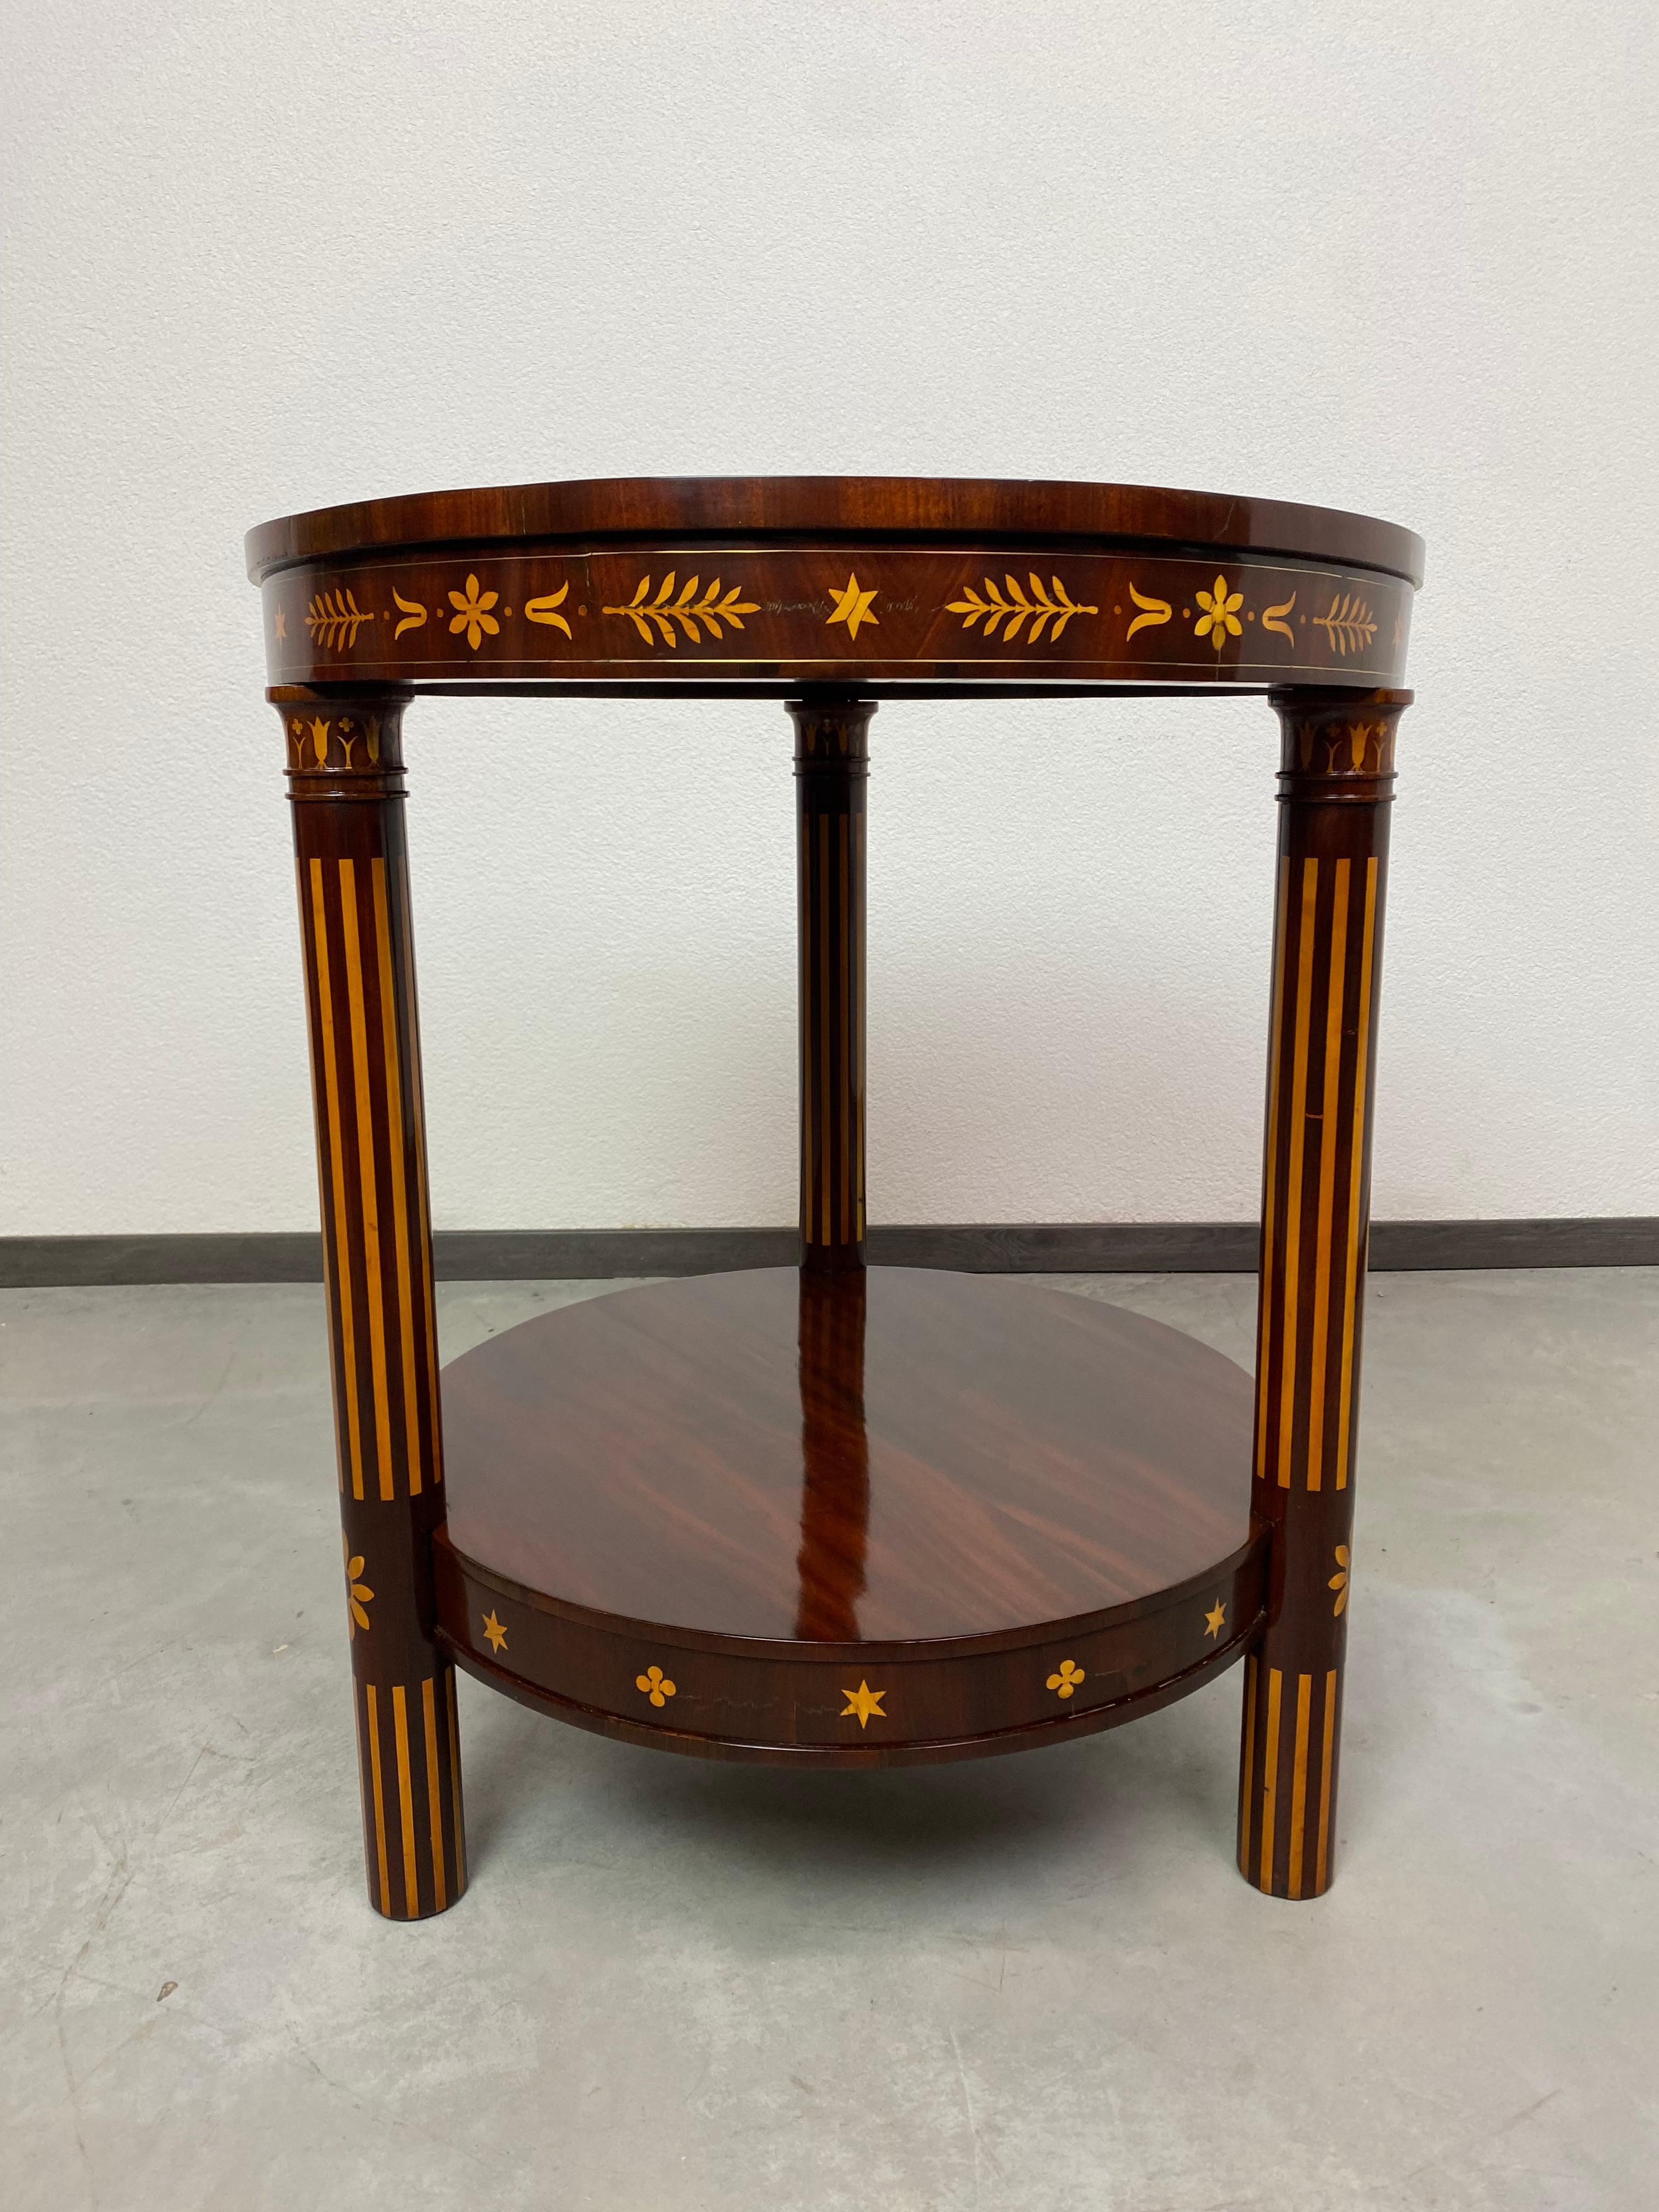 Inlaid empire side table circa 1800 professionally stained and repolished.